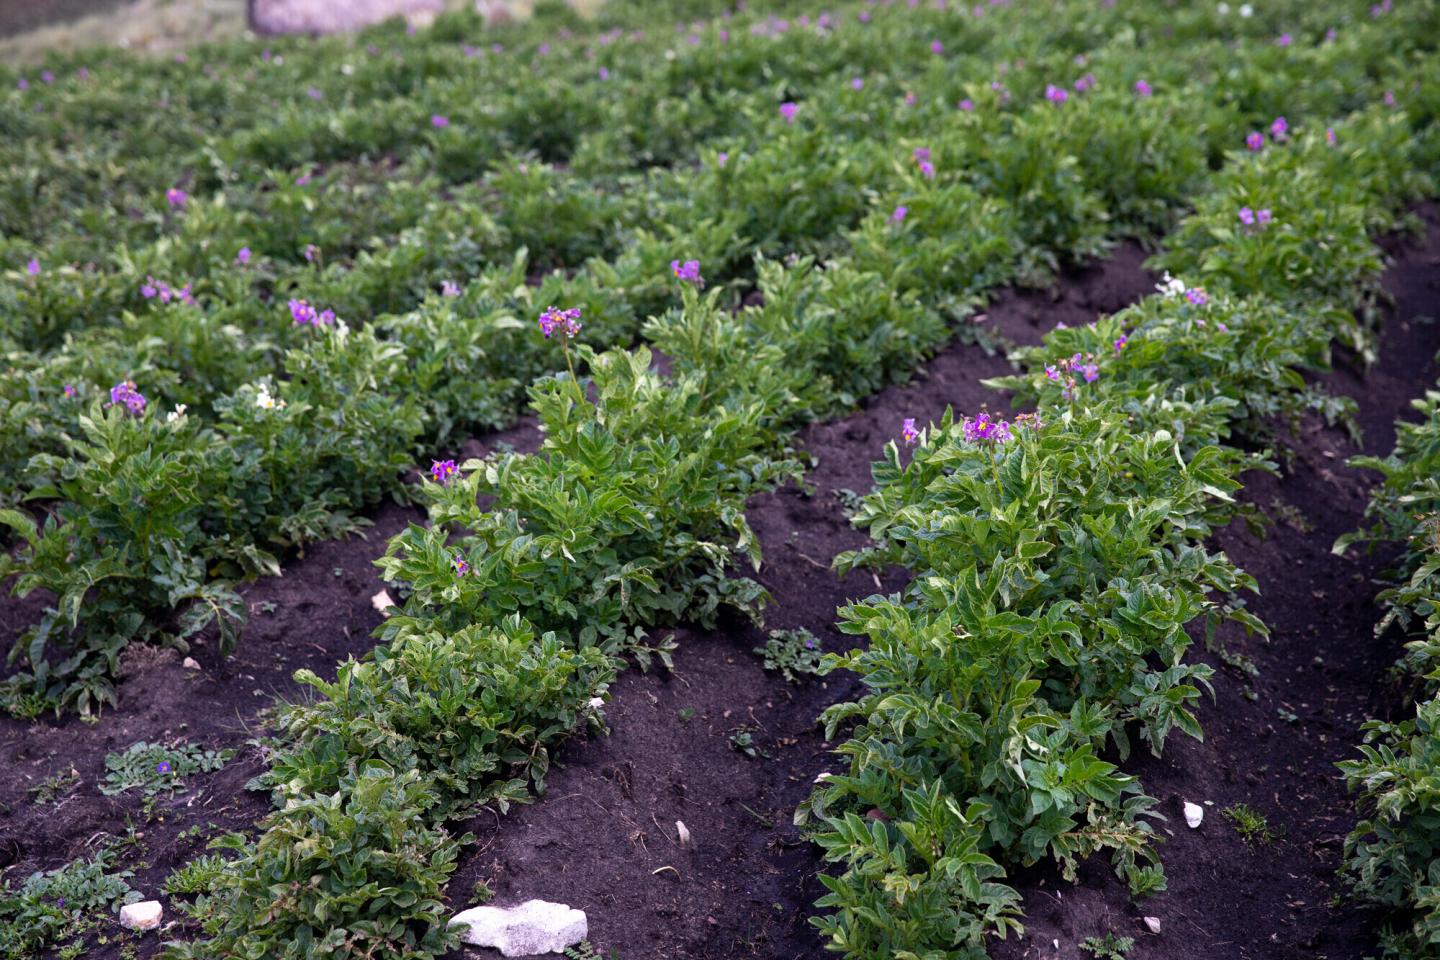 A field of potatoes. Some of the plants have purple flowers.